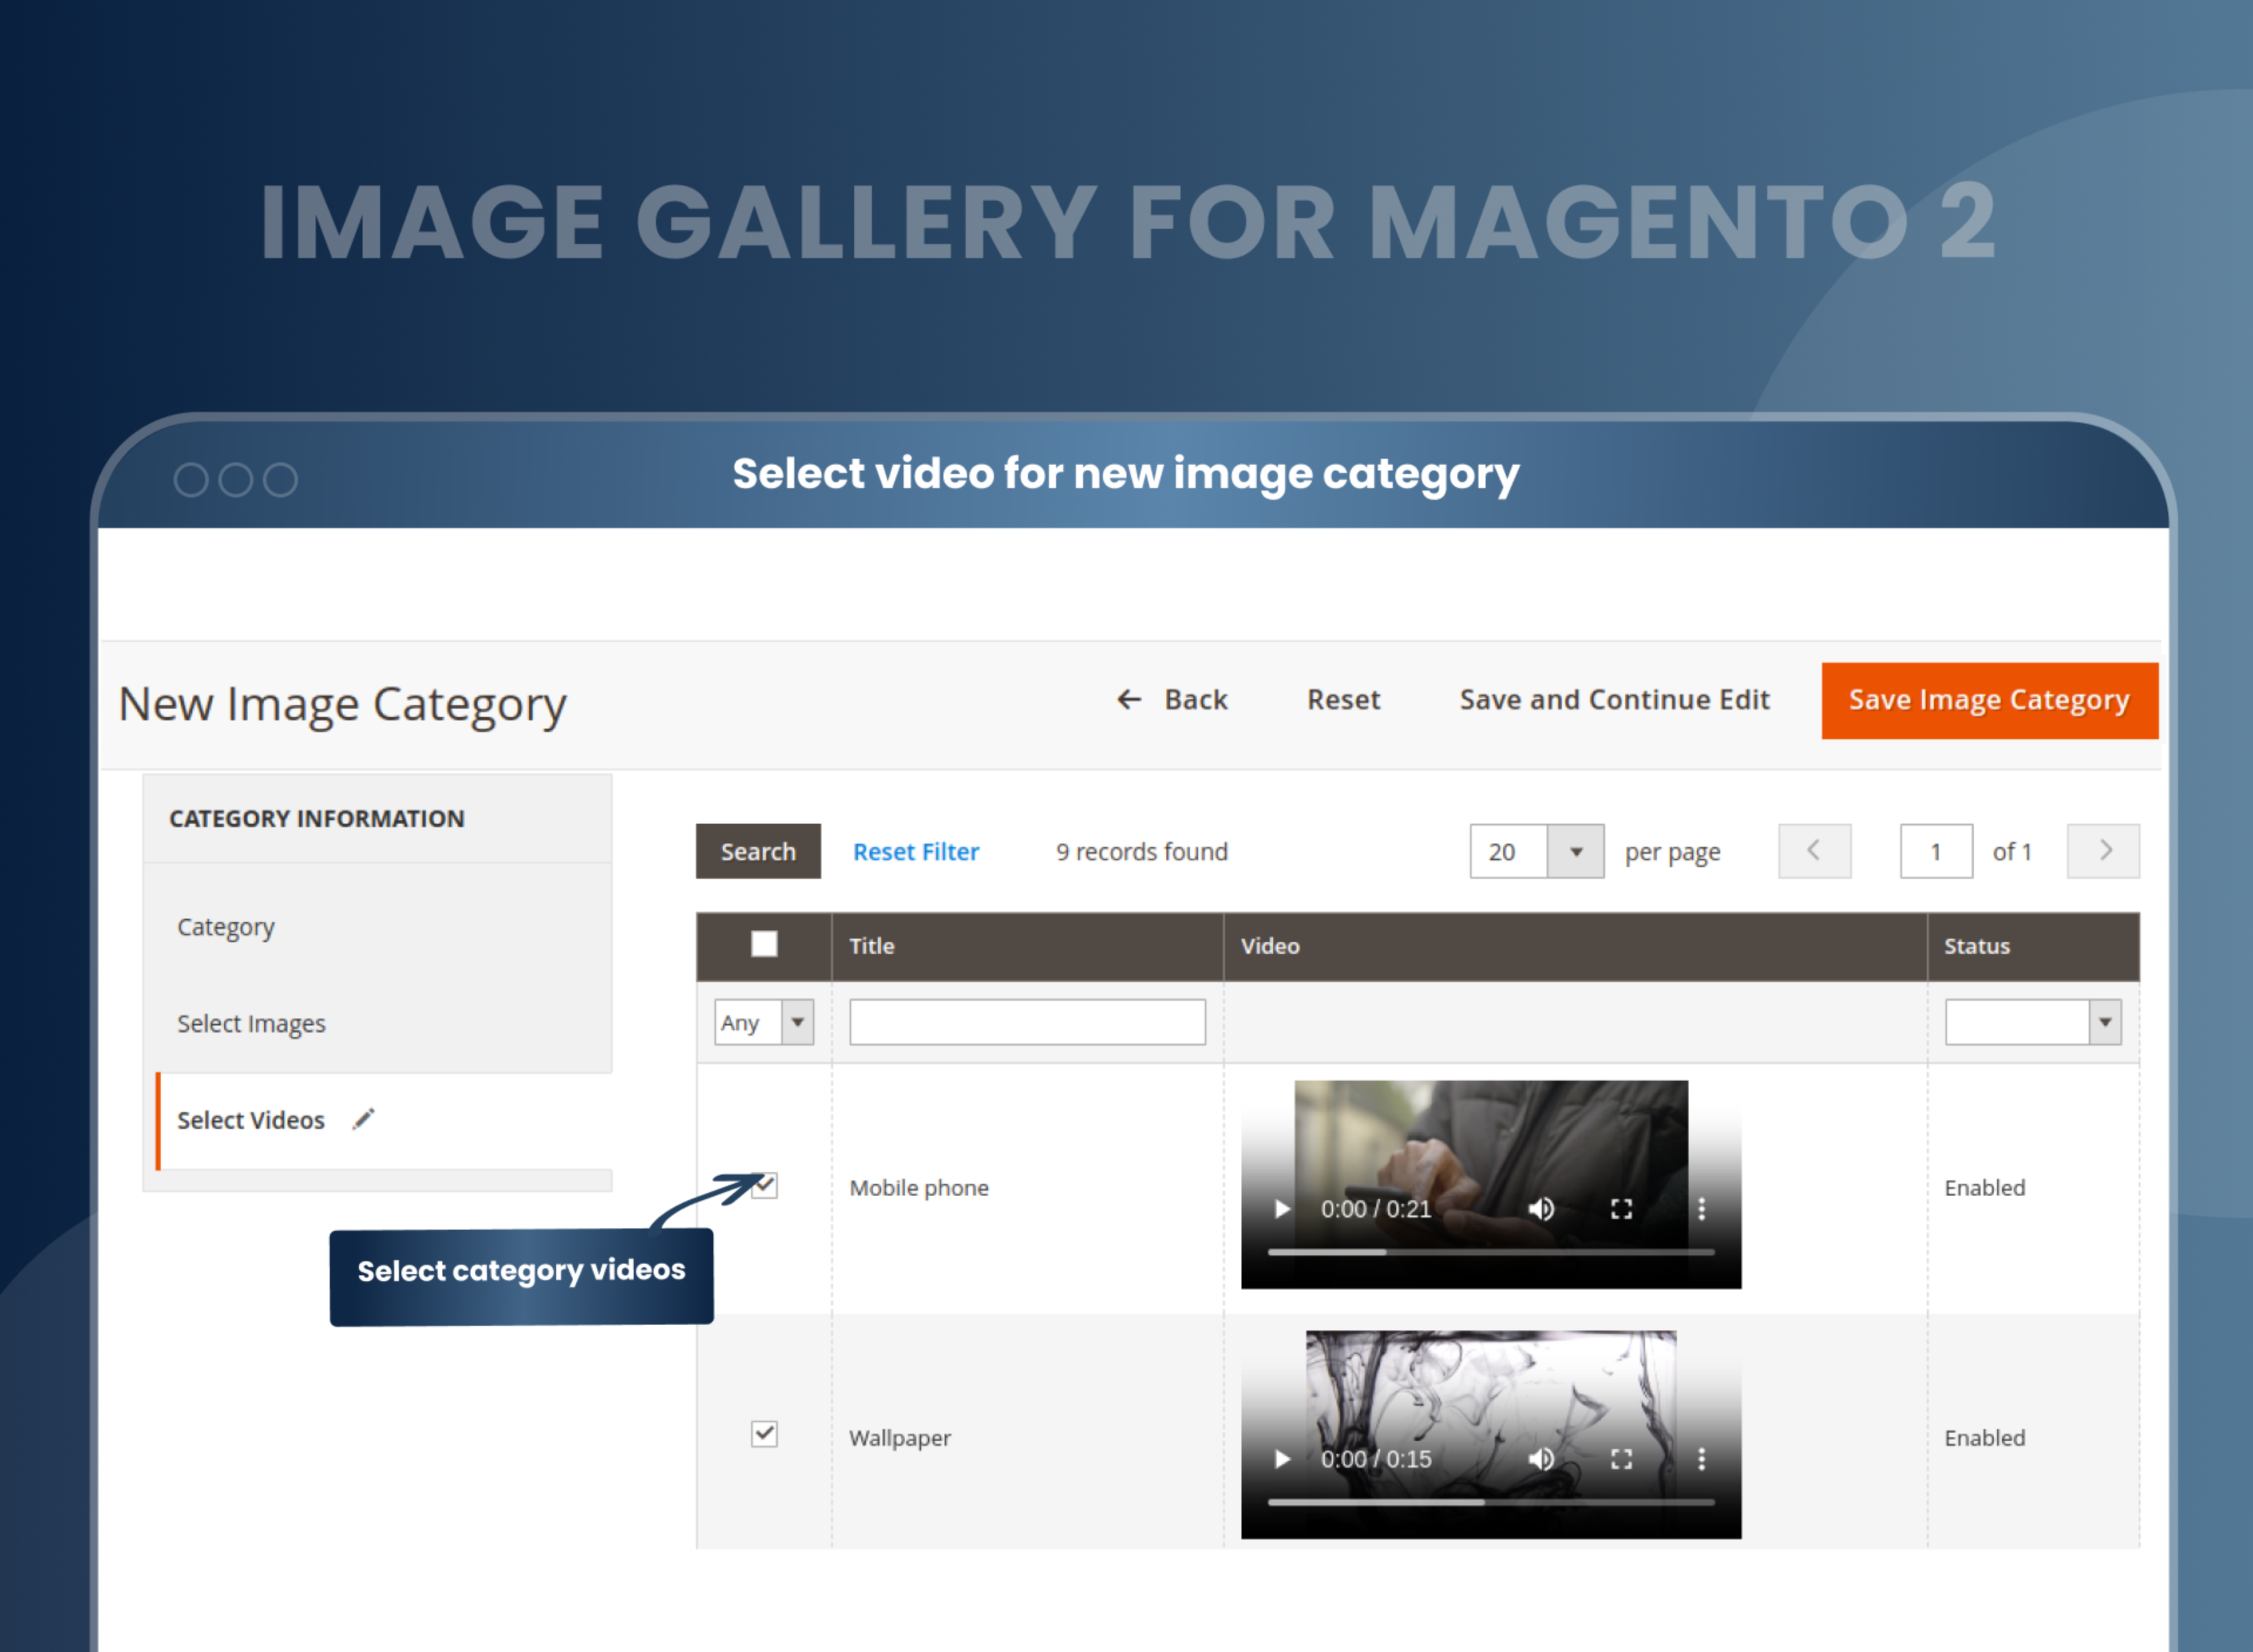 Select video for new image category